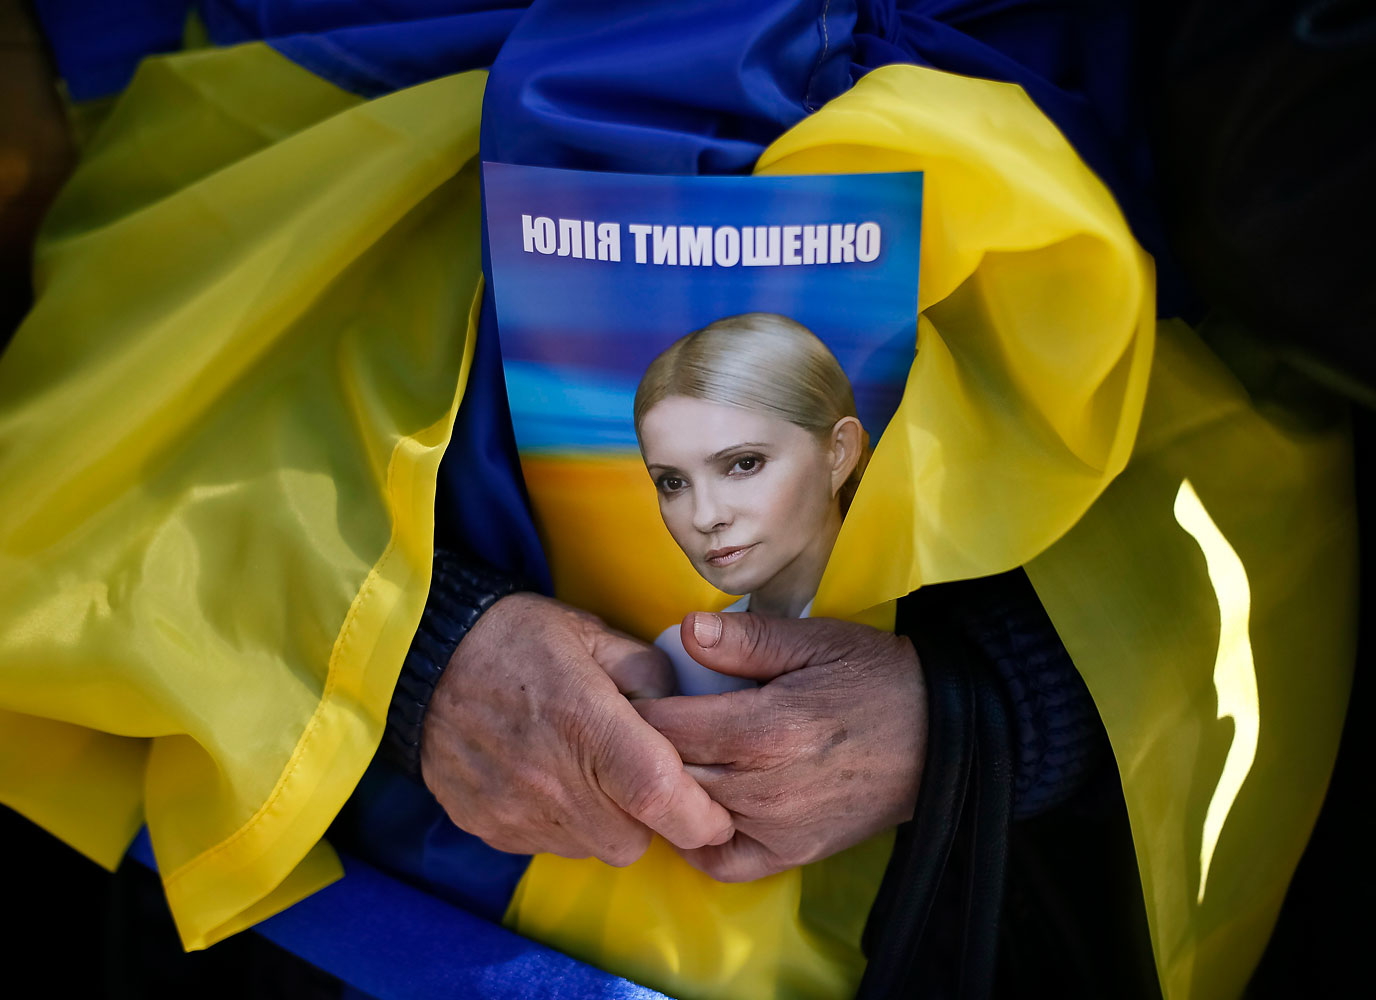 A supporter of Ukrainian politician and former prime minister Yulia Tymoshenko in central Kiev, March 29, 2014. If she is elected President, Tymoshenko has pledged to fight corruption, as have most of the candidates who have put forward a platform for the vote.